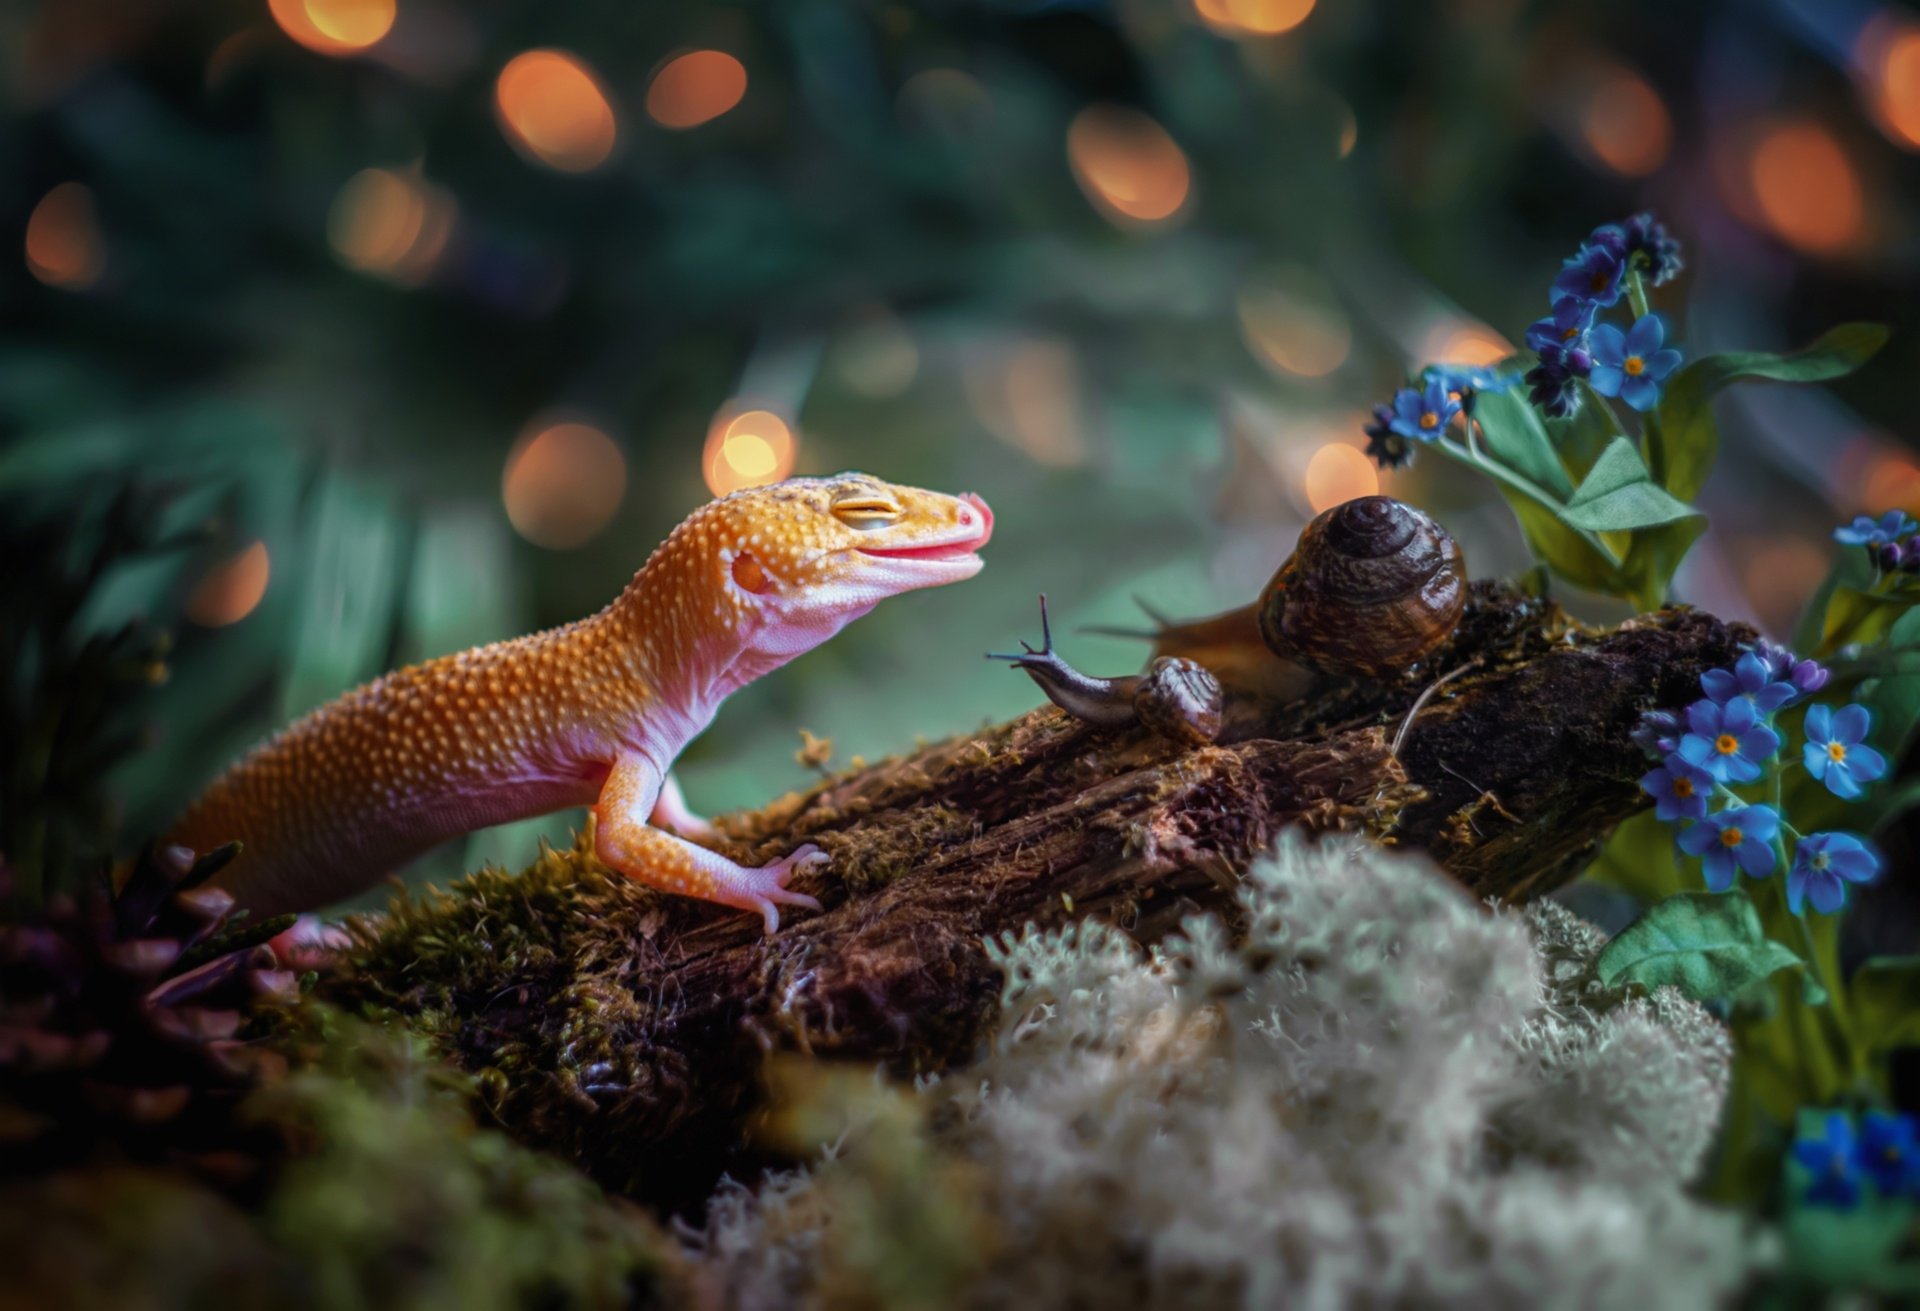 Common Leopard Gecko Hd Wallpaper Background Image 1920x1311 Id 1080956 Wallpaper Abyss